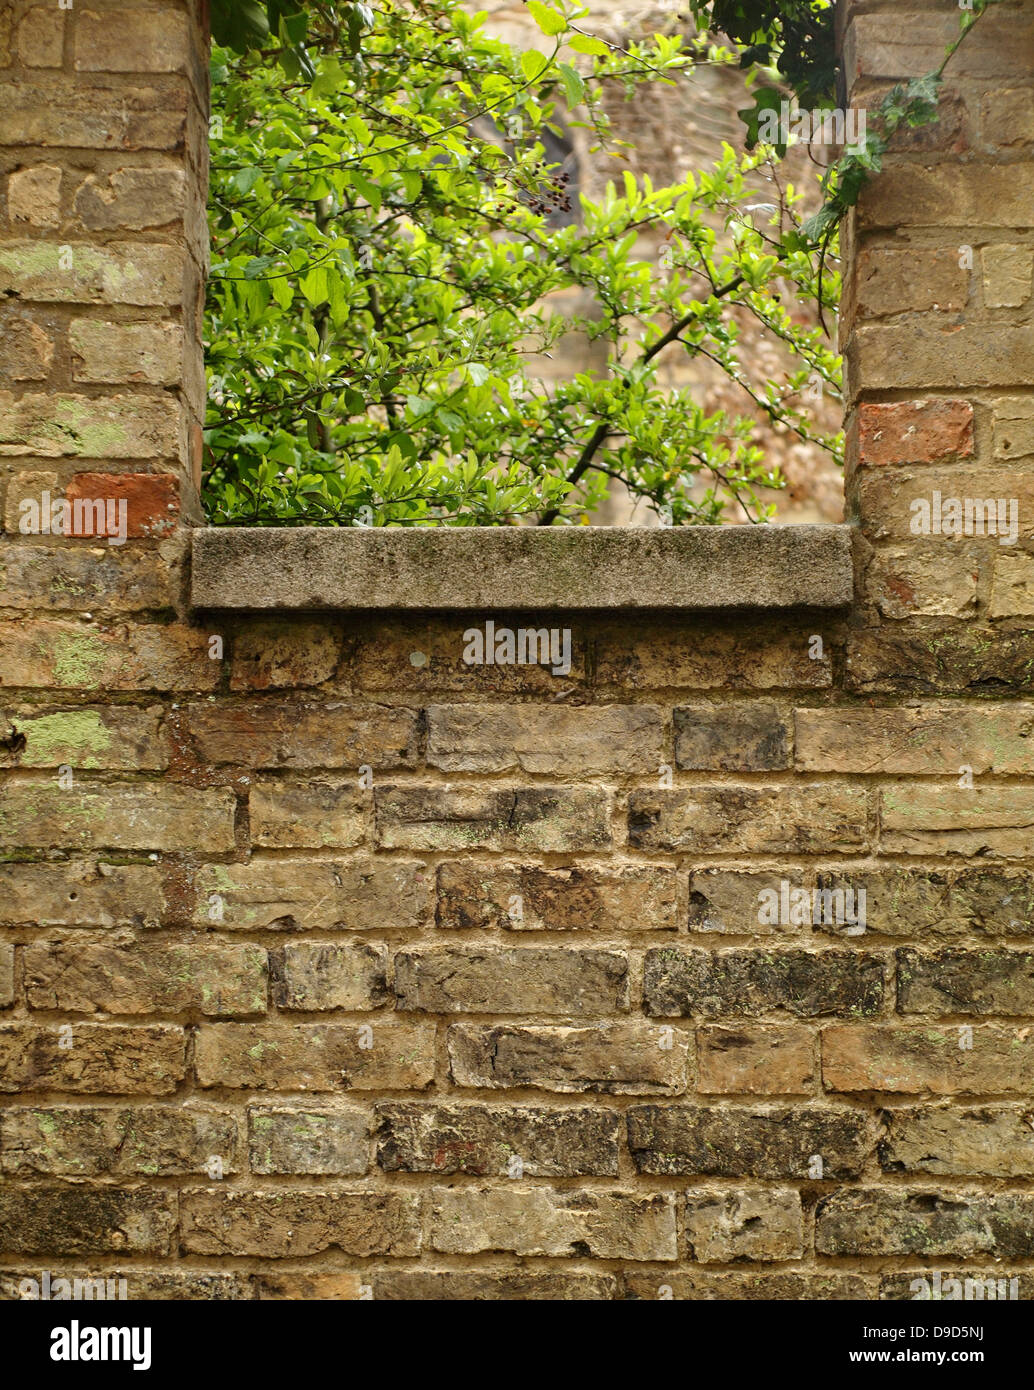 brick wall with opening showing tree branches Stock Photo